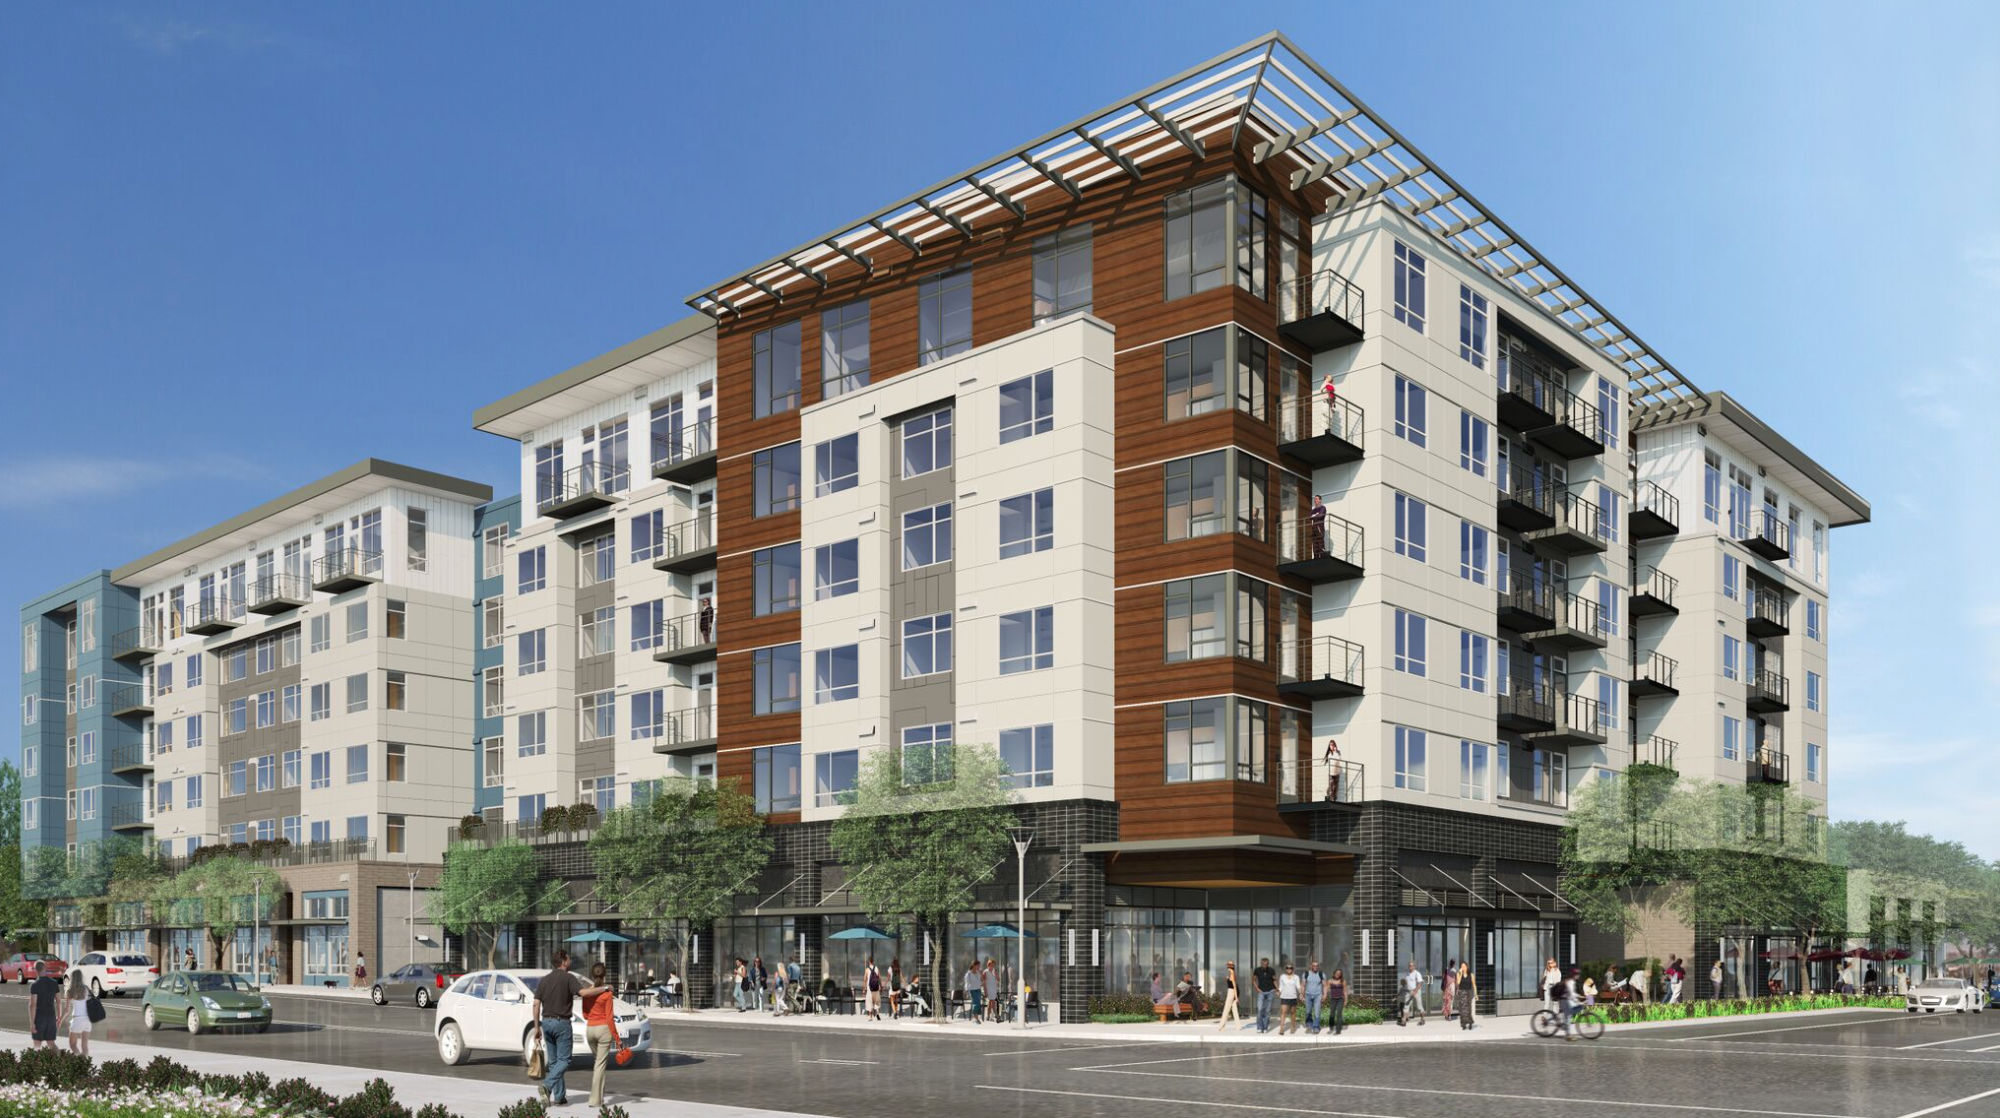 rendering of whole block project, showing tall multifamily building above street level retail with sidewalk dining